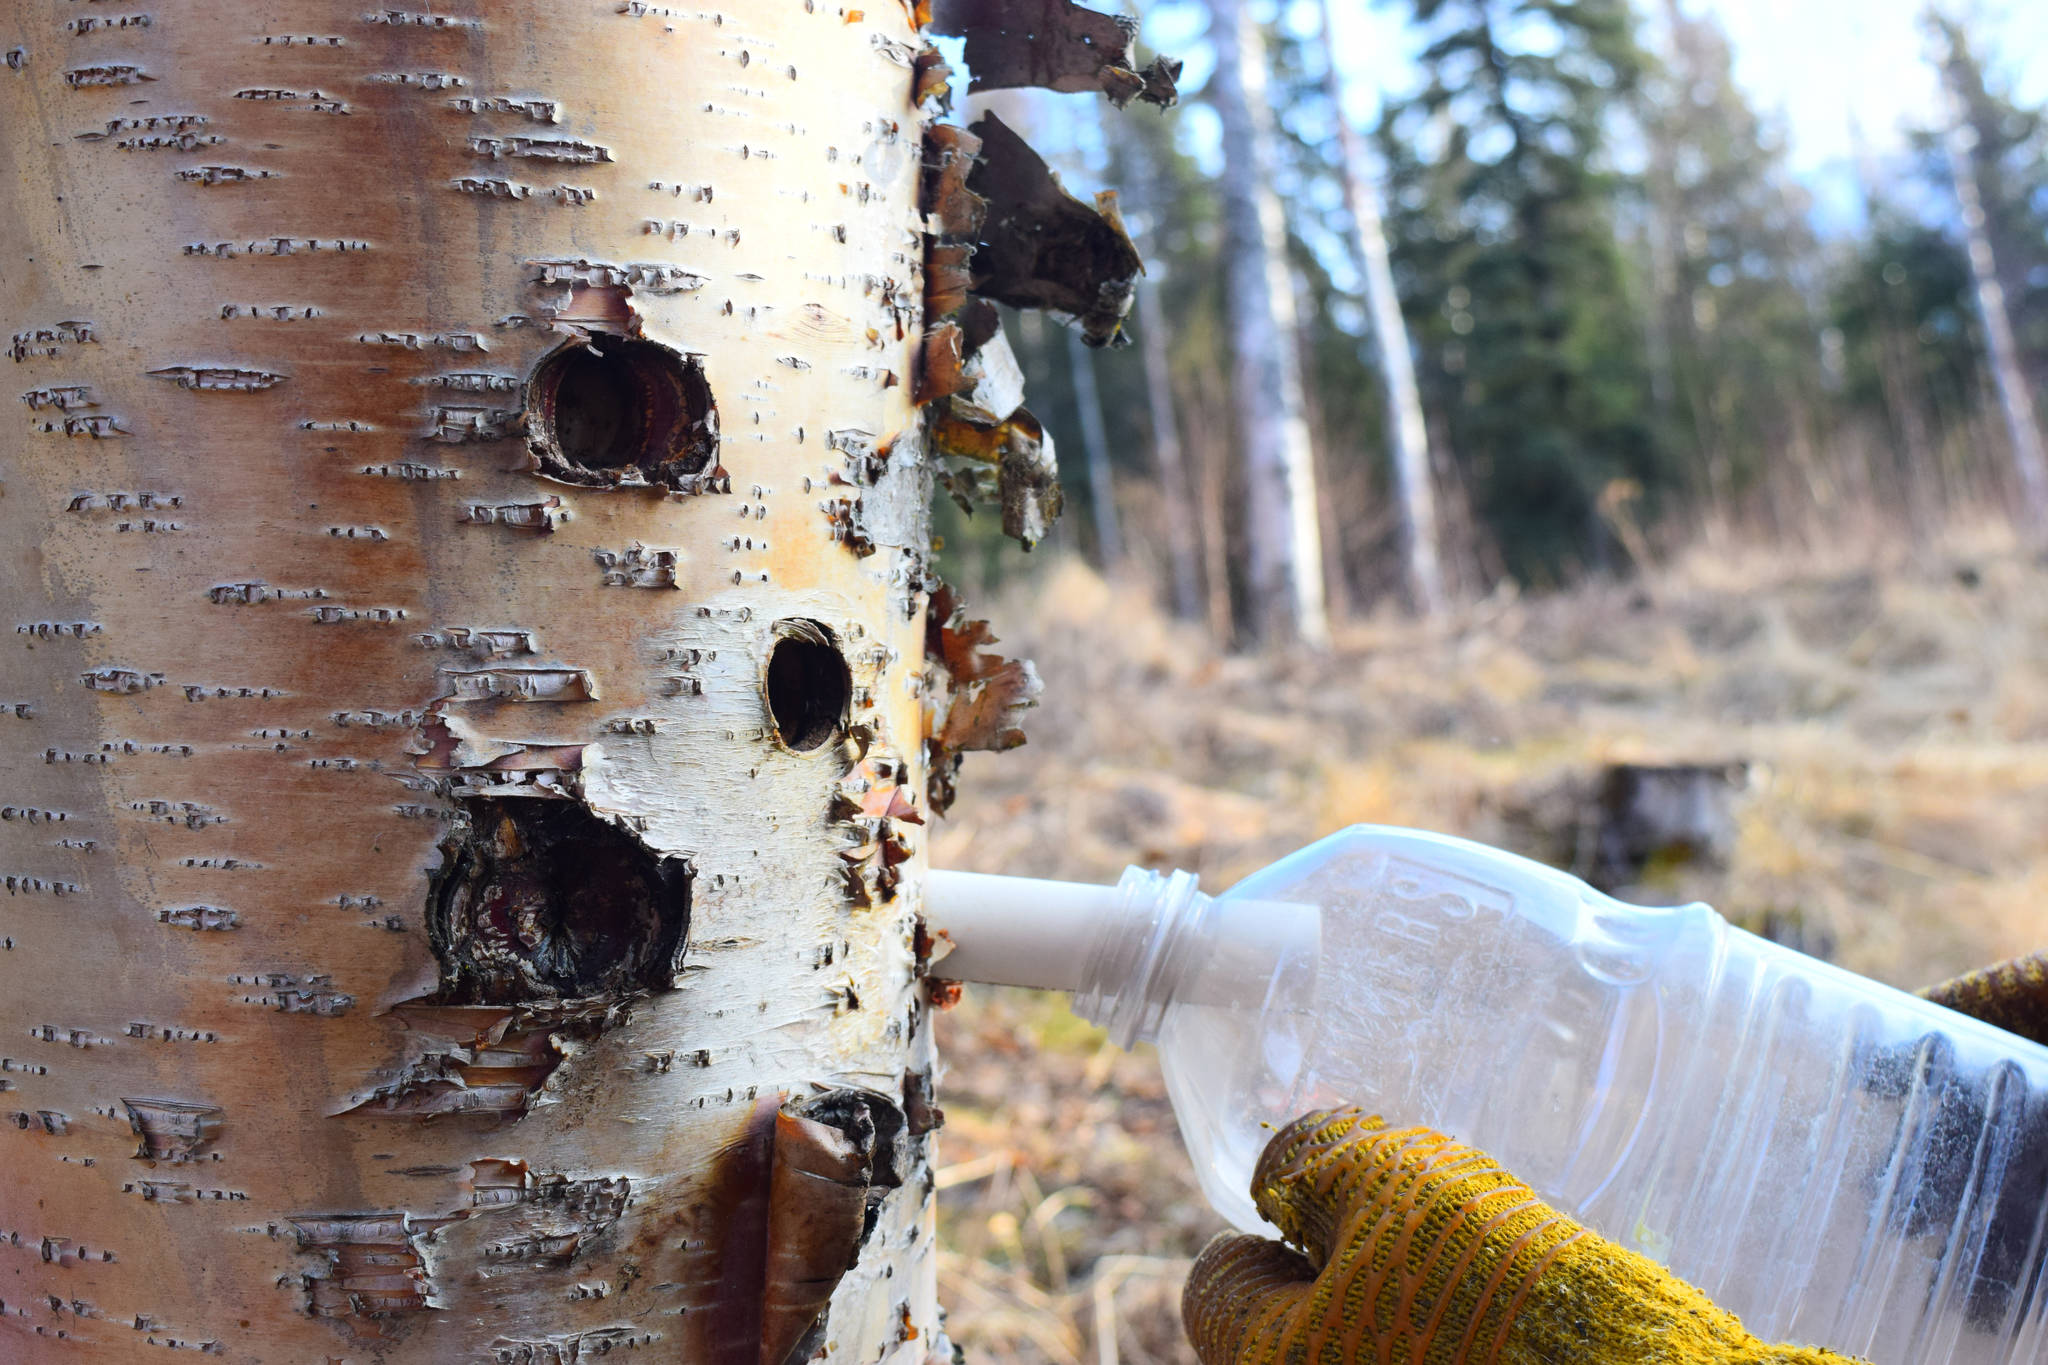 Photo by Jennifer Tarnacki A plastic bottle hangs from a spiel to collect birch sap. To read about birch tapping and the many fruits of that labor, see page 8.